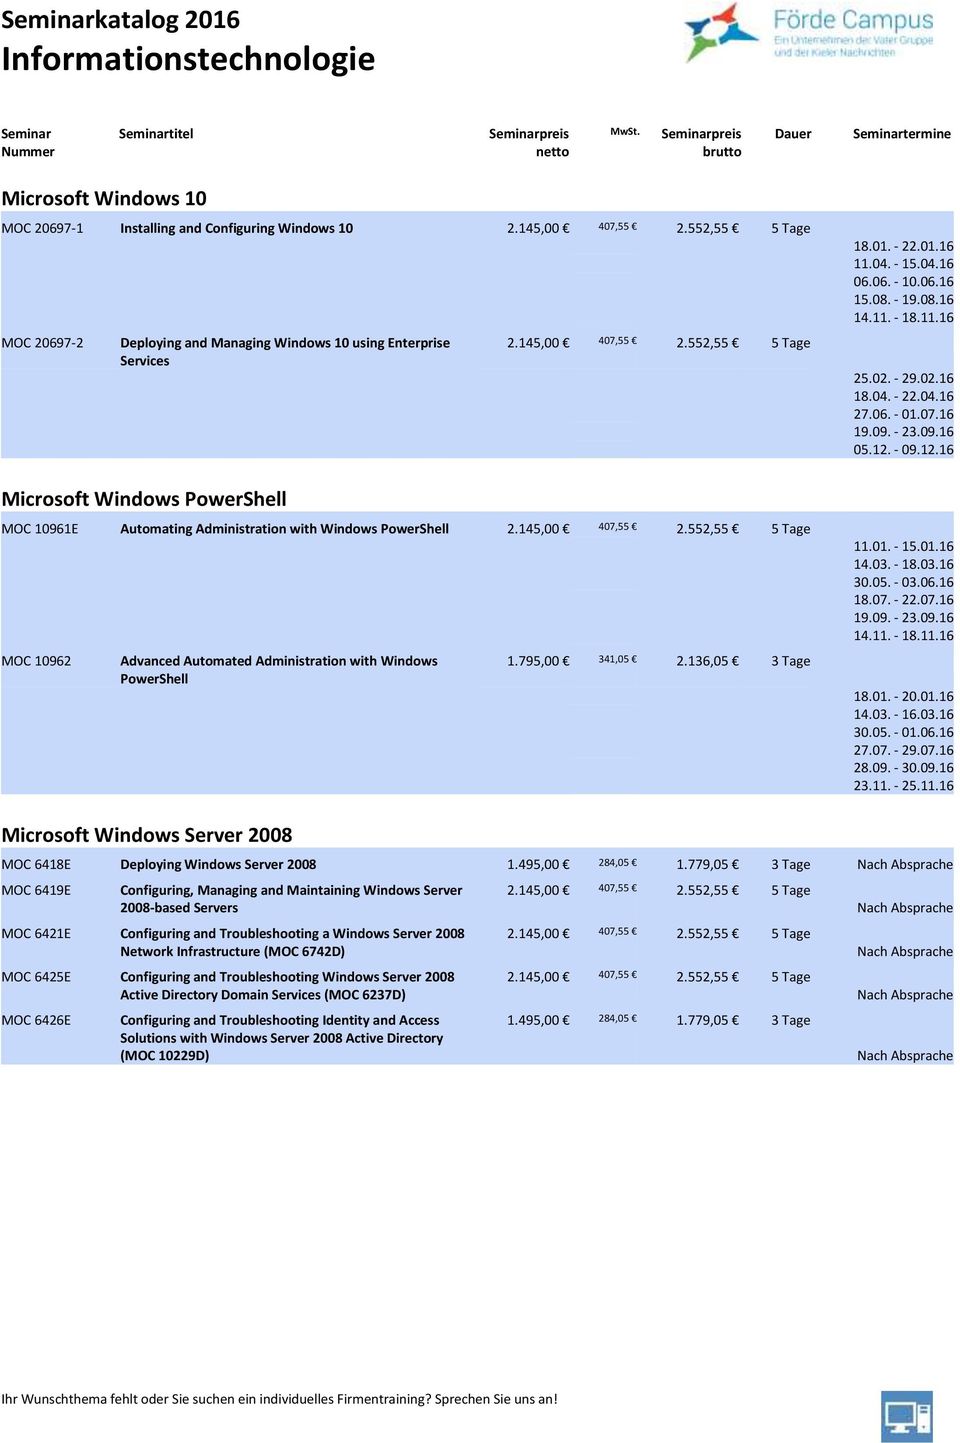 552,55 5 Tage MOC 10961E Automating Administration with Windows PowerShell 2.145,00 407,55 2.552,55 5 Tage MOC 10962 Advanced Automated Administration with Windows PowerShell 1.795,00 341,05 2.